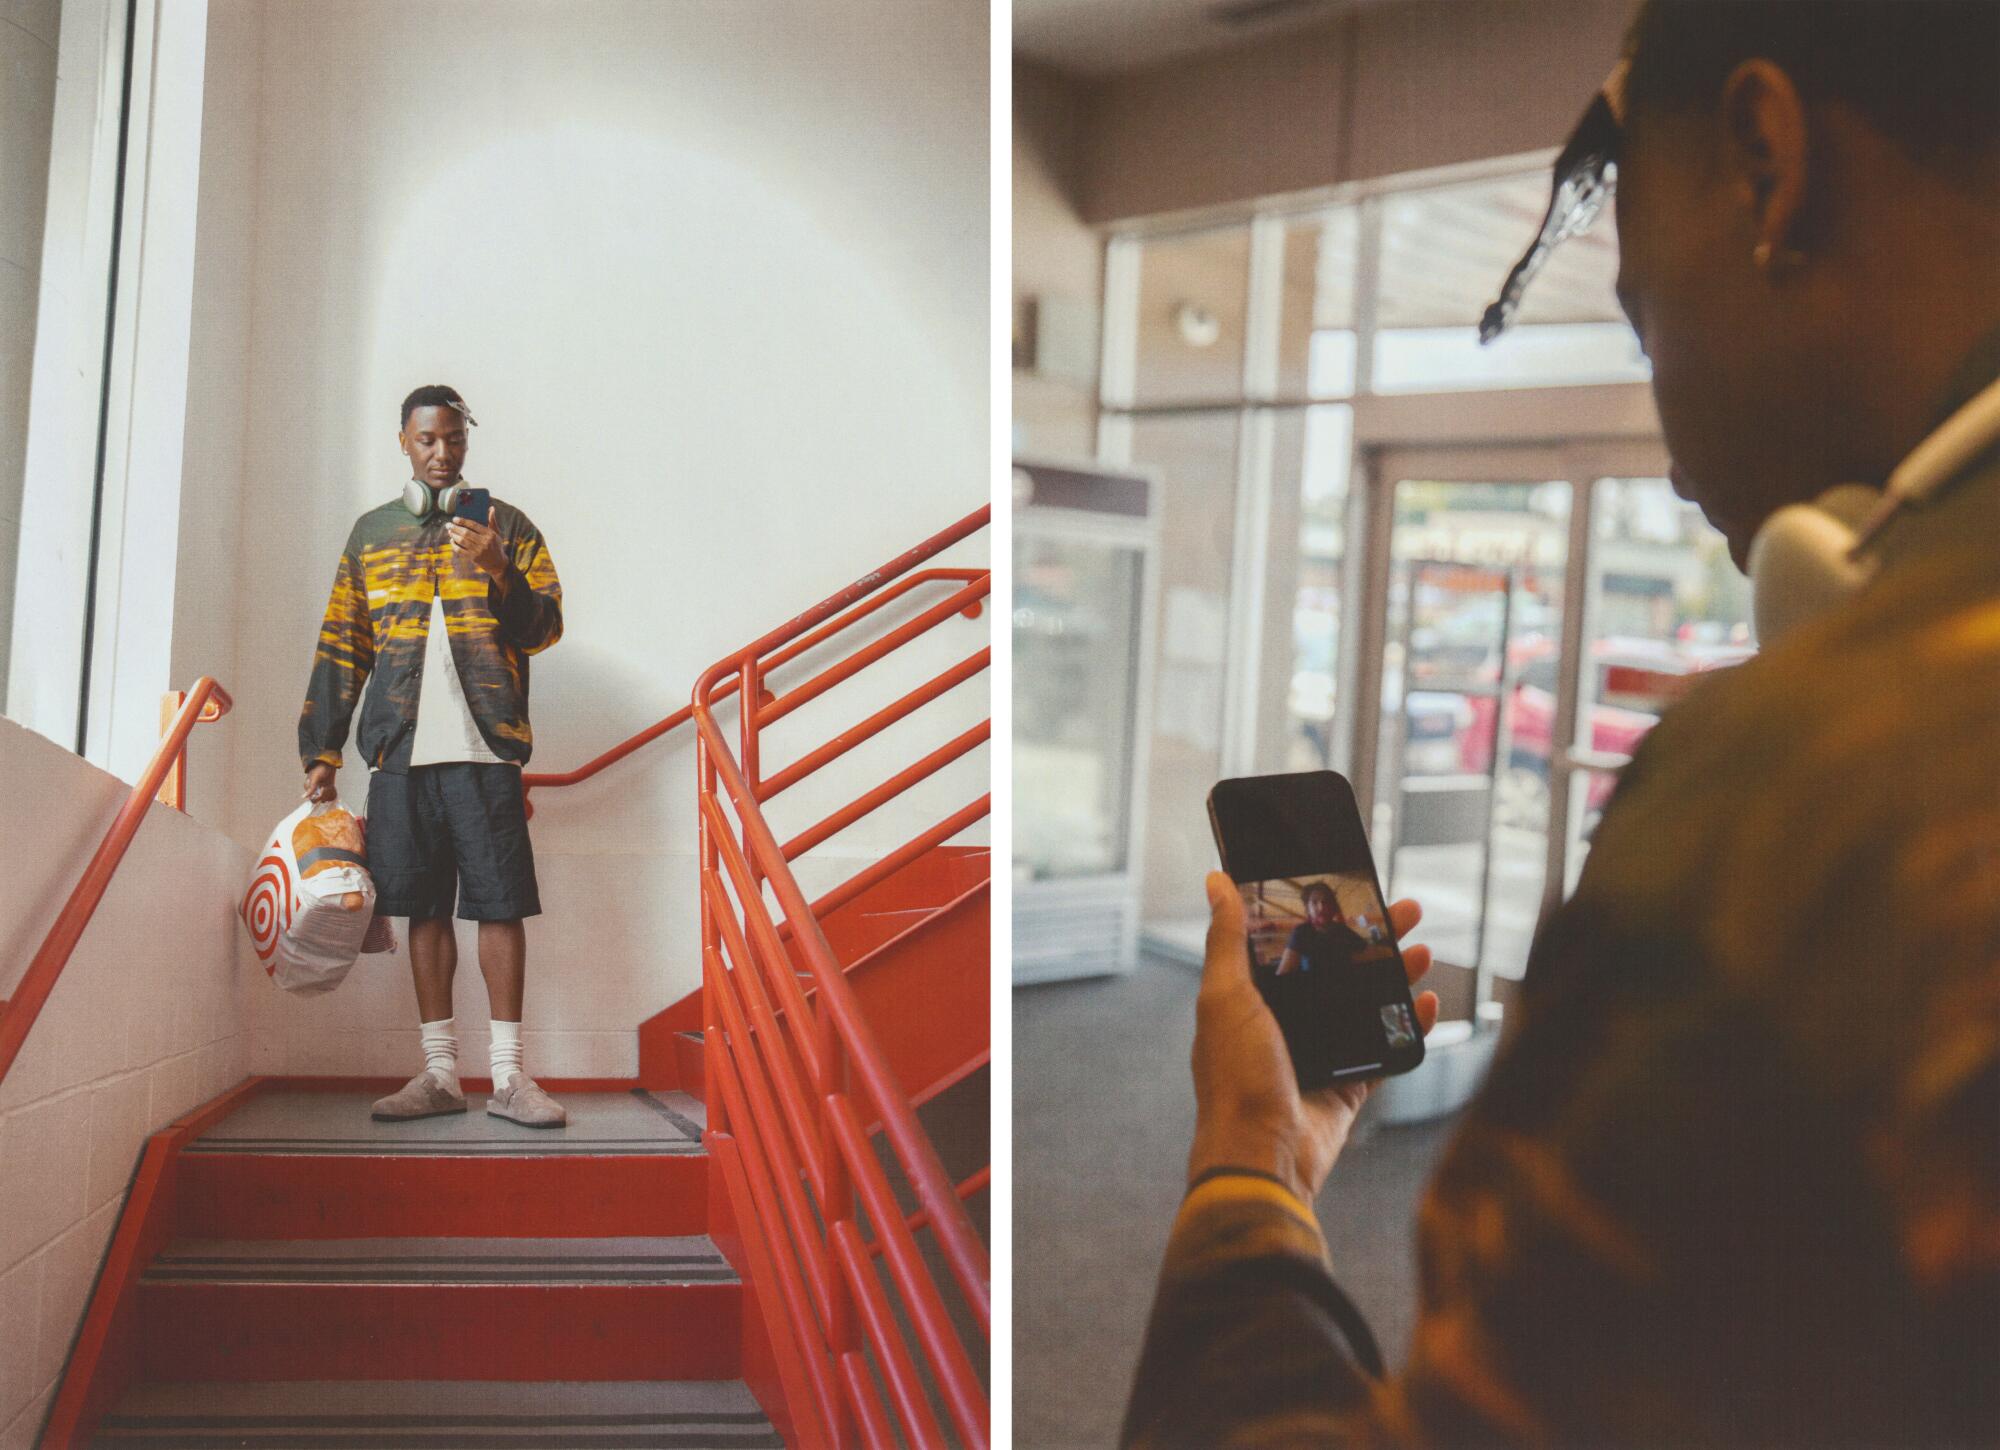 A man stands on a staircase looking at his phone